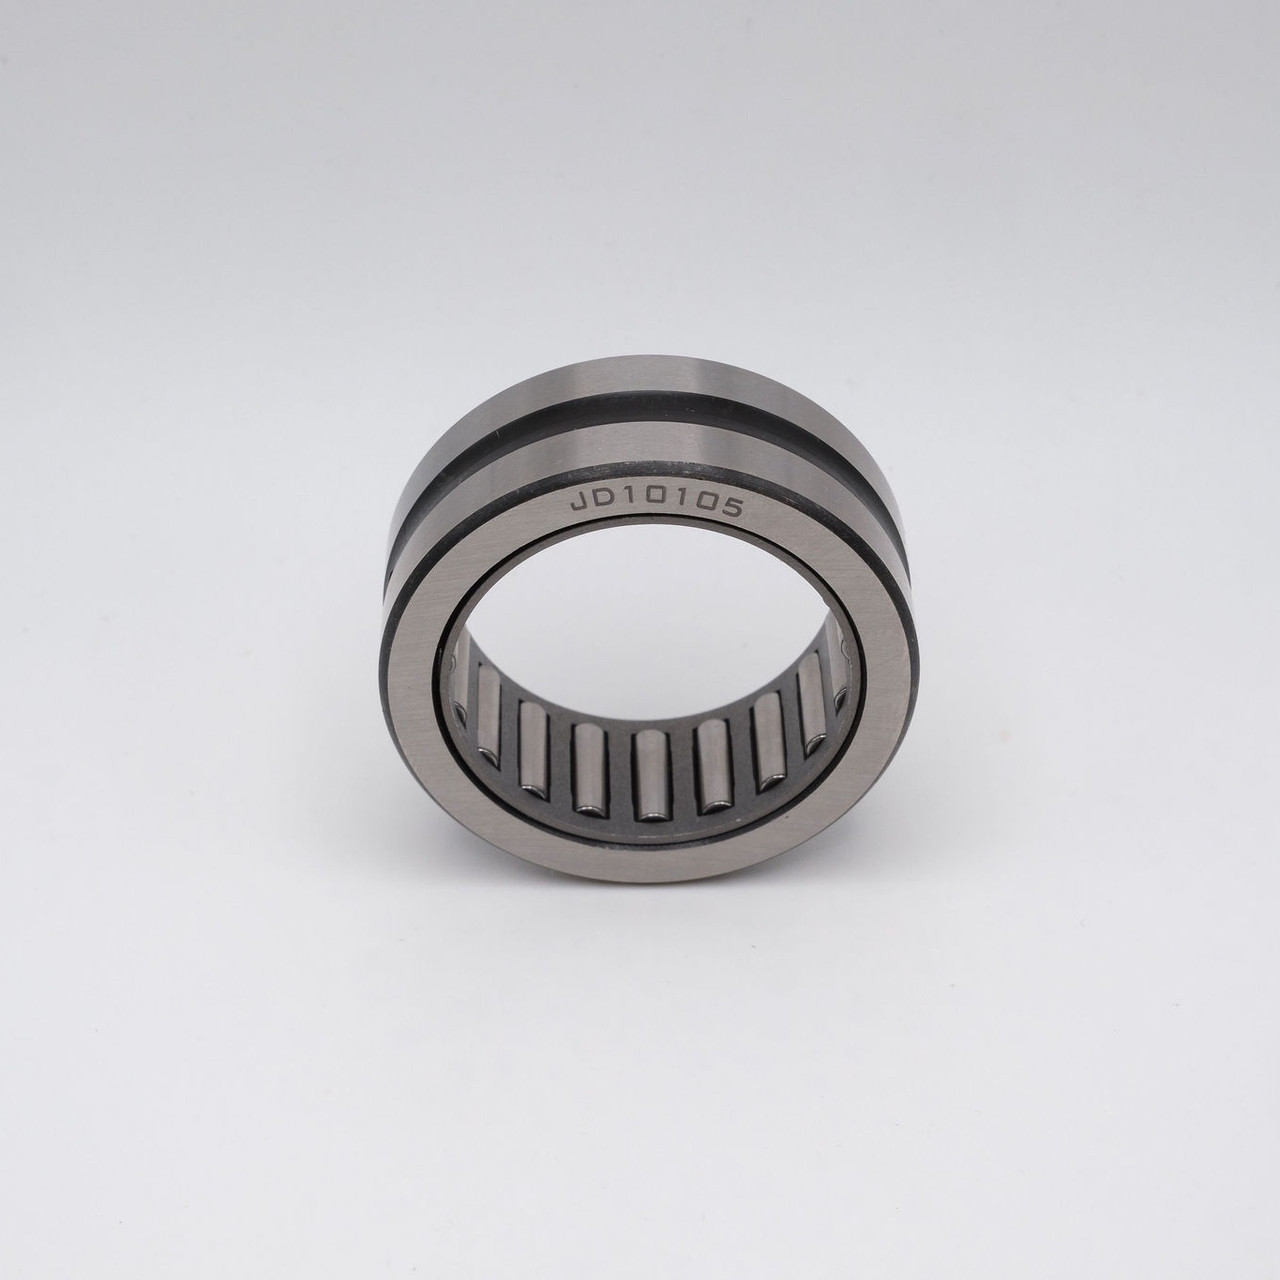 JD10105 Machined Needle Roller Bearing 32x17x45mm Front View